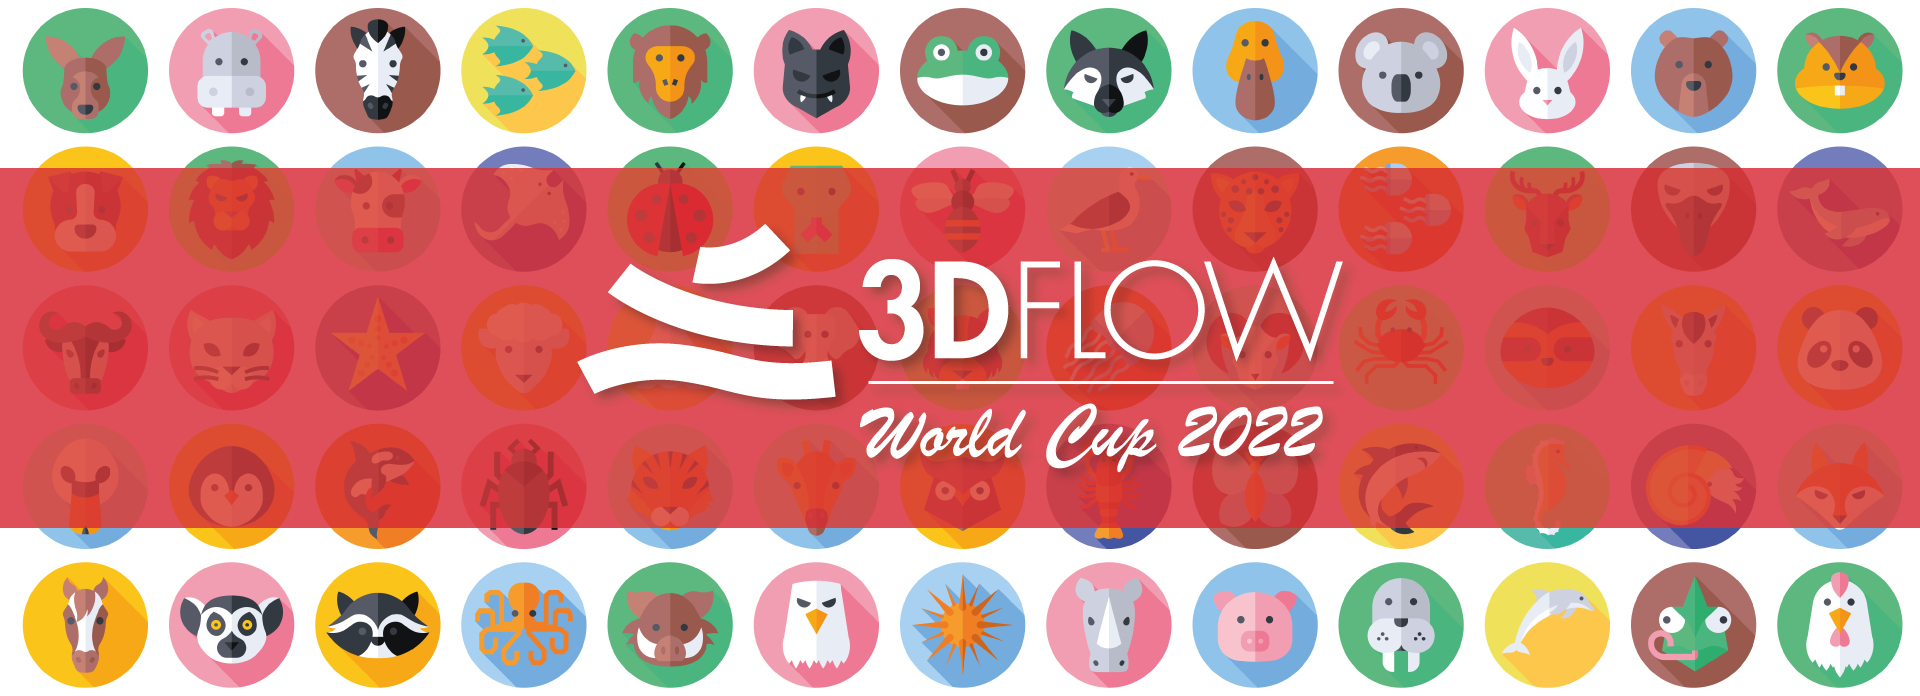 3Dflow World Cup